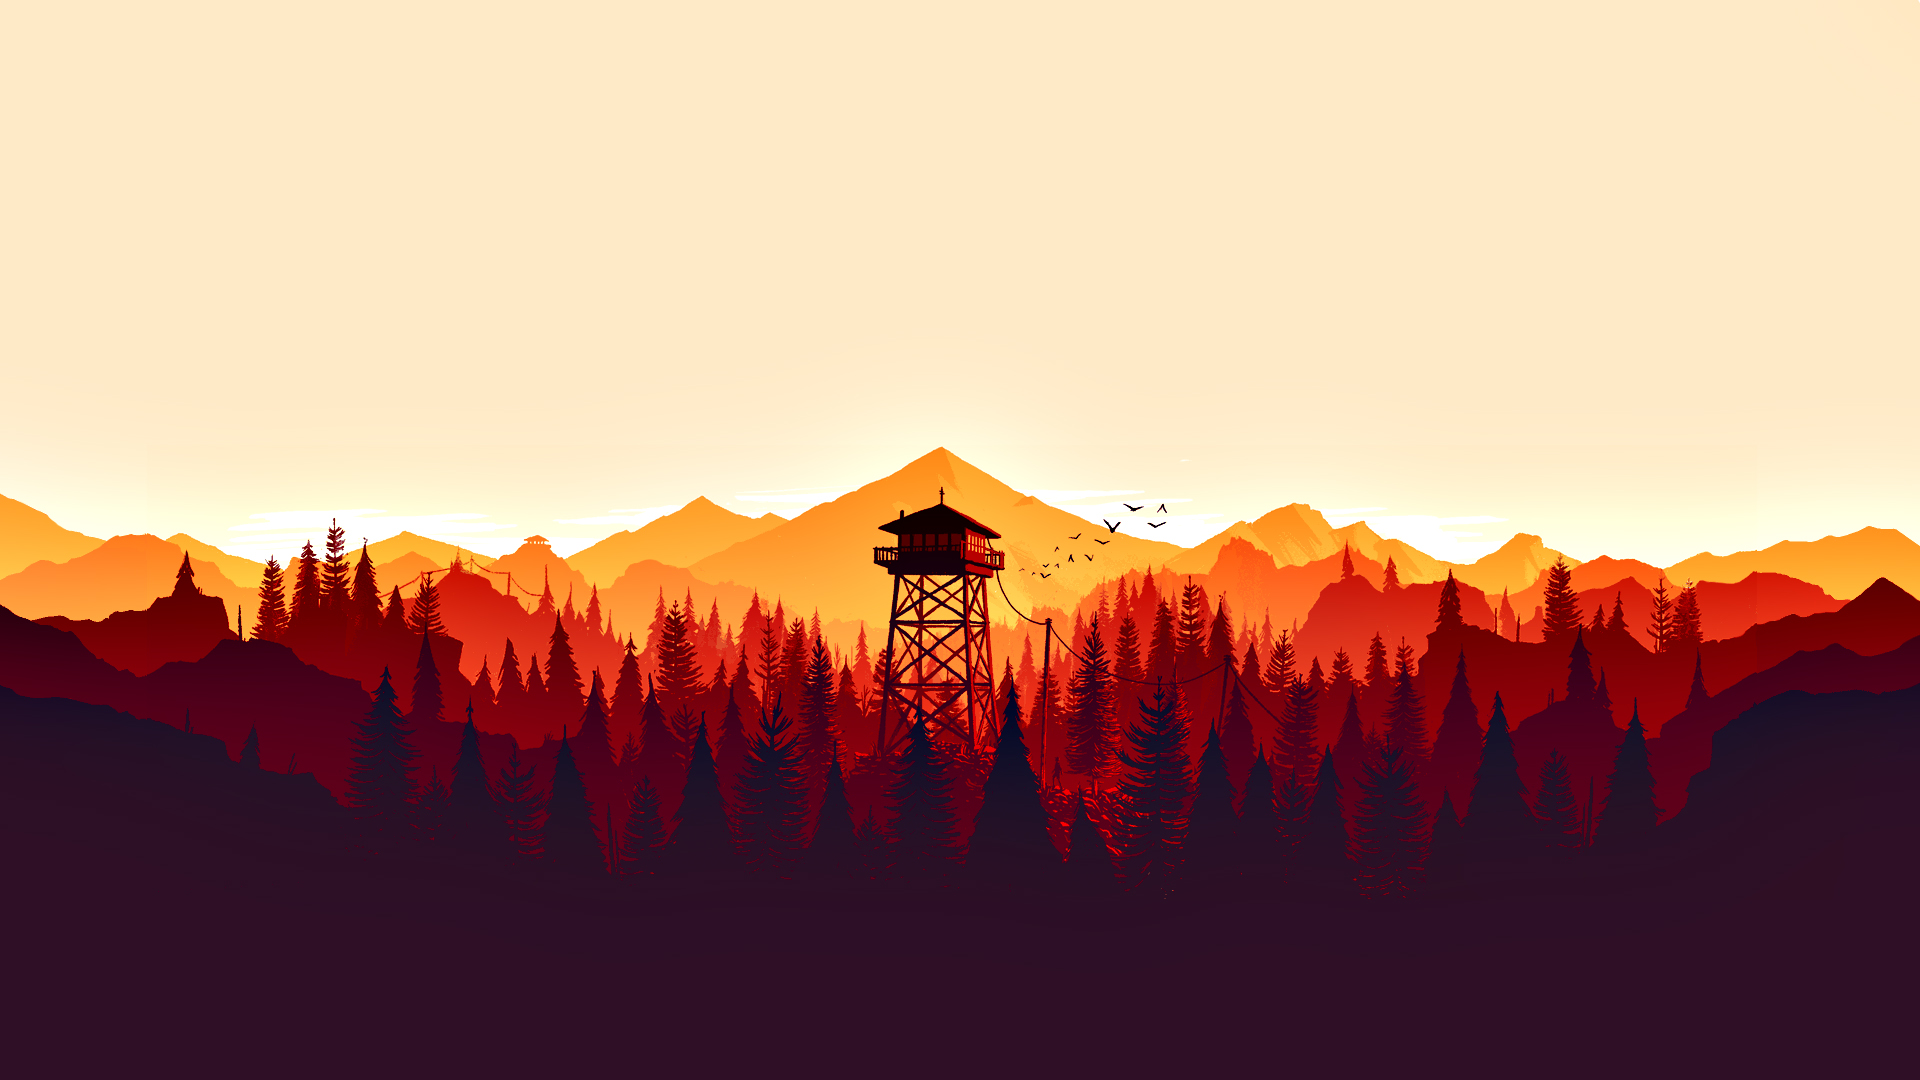 General 1920x1080 drawing traditional art Firewatch video games video game art PC gaming trees landscape mountains artwork